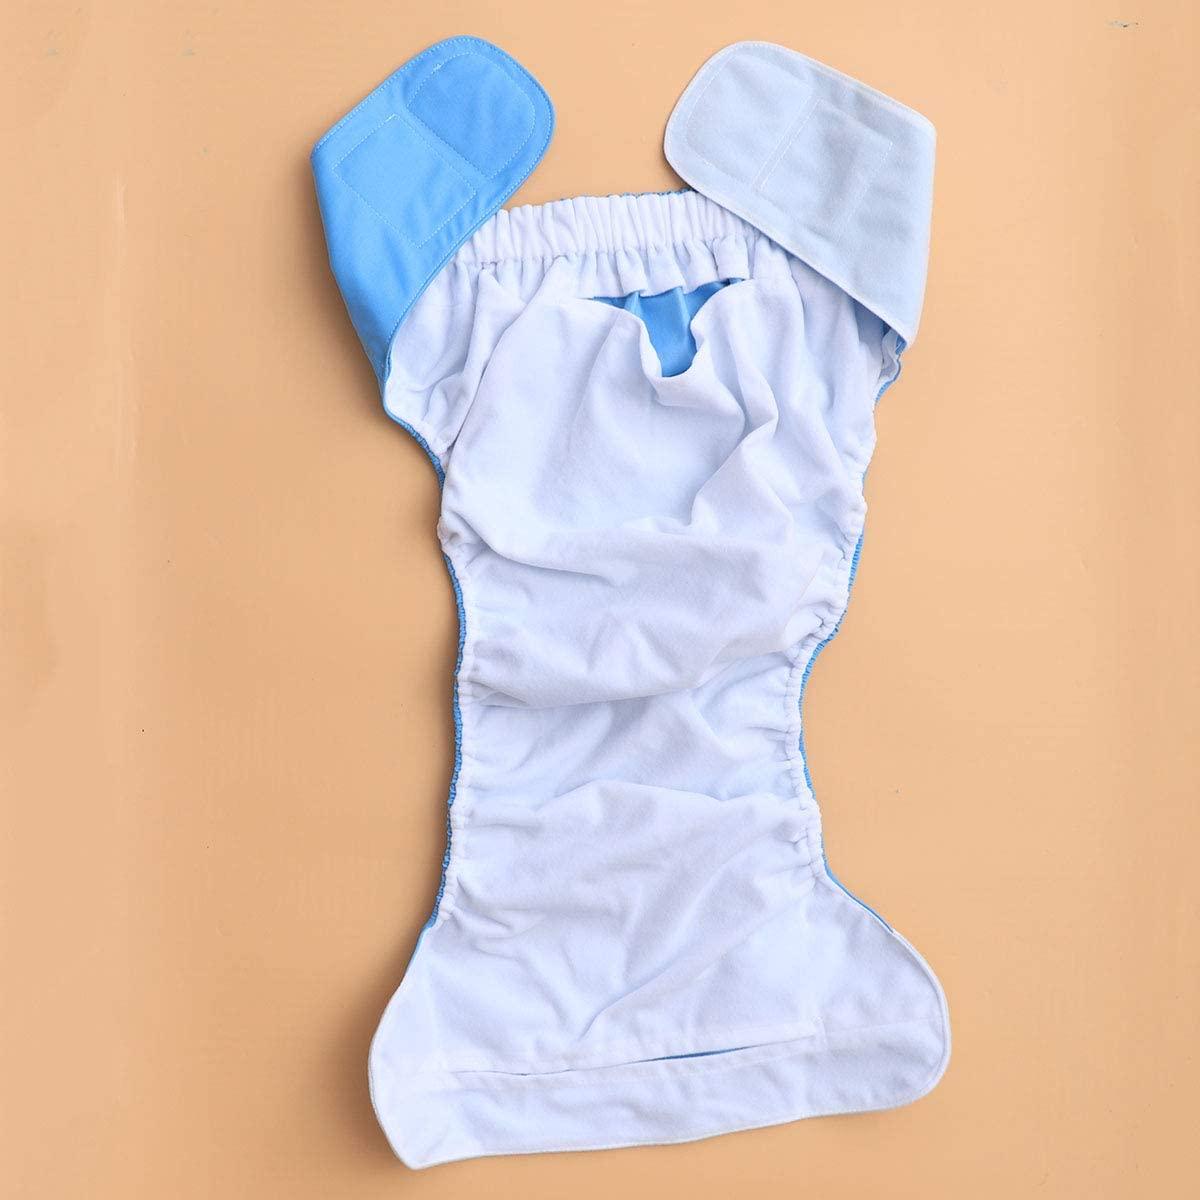 Healifty Washable underwear2pcs Adult Diapers Covers Reusable Incontinence Pants  Cloth Diaper Wraps Washable Overnight Leakfree Underwear for Women Men  Bariatric Seniors Patients (Sky Blue)